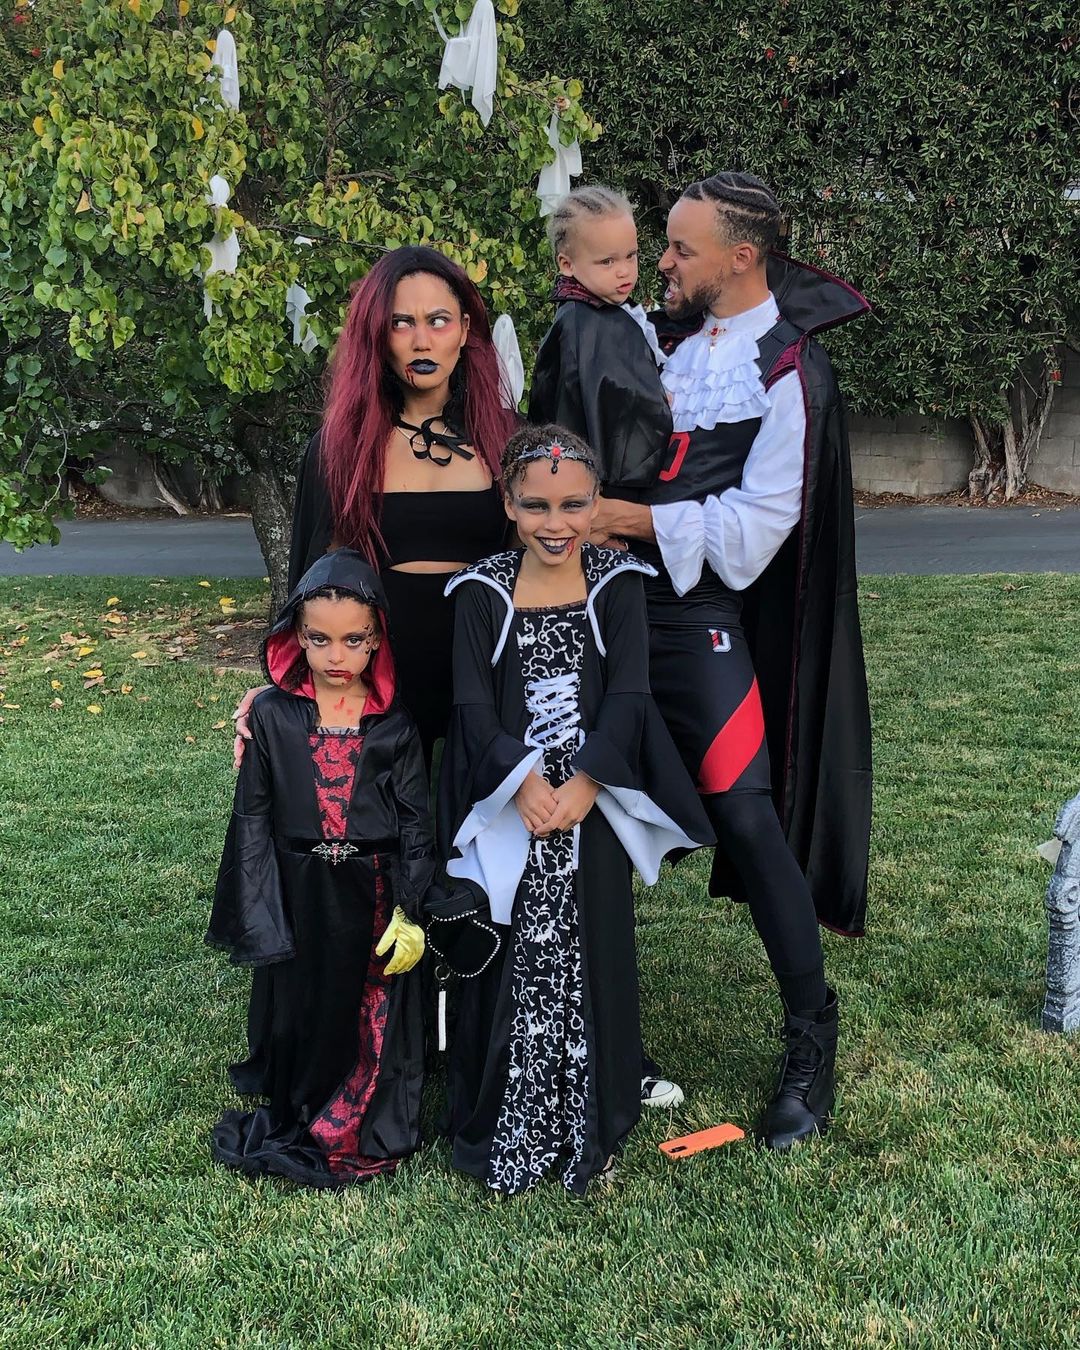 2 October 2020 Stephen Curry and Ayesha Curry’s Family Album With 3 Kids